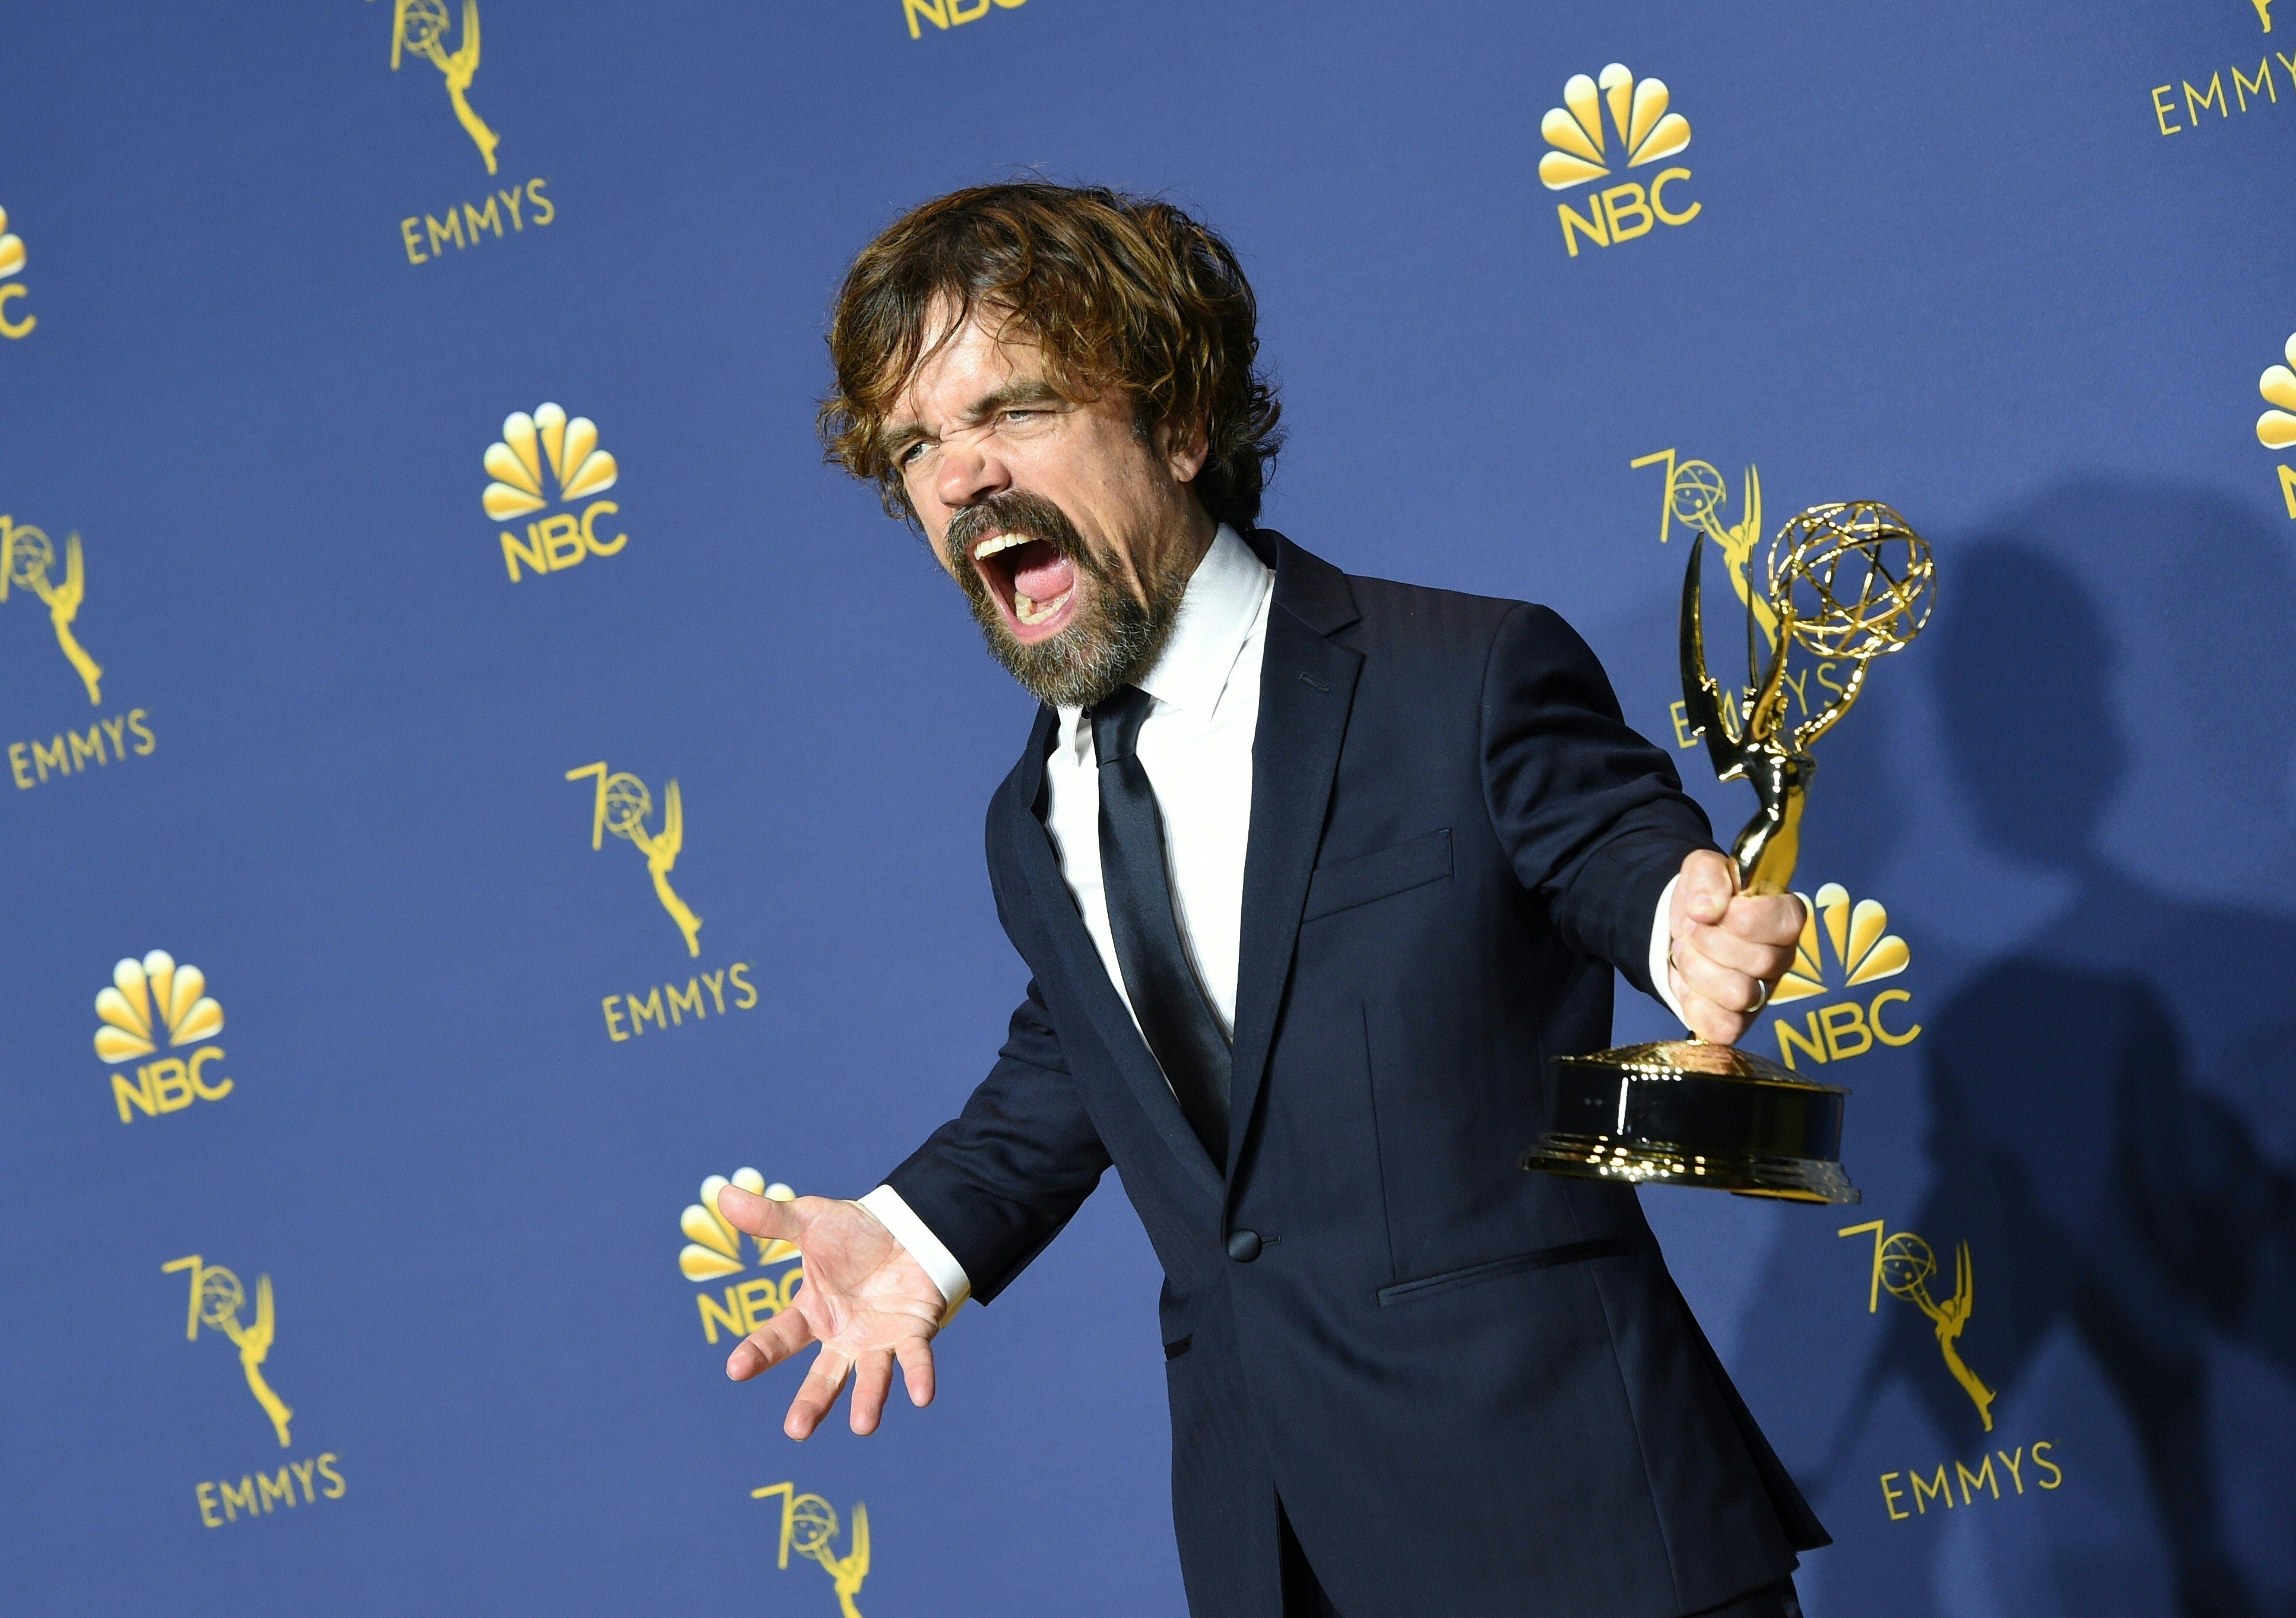 Photo: Game of Thrones wins award at Primetime Emmy Awards in Los Angeles -  LAP20190922410 